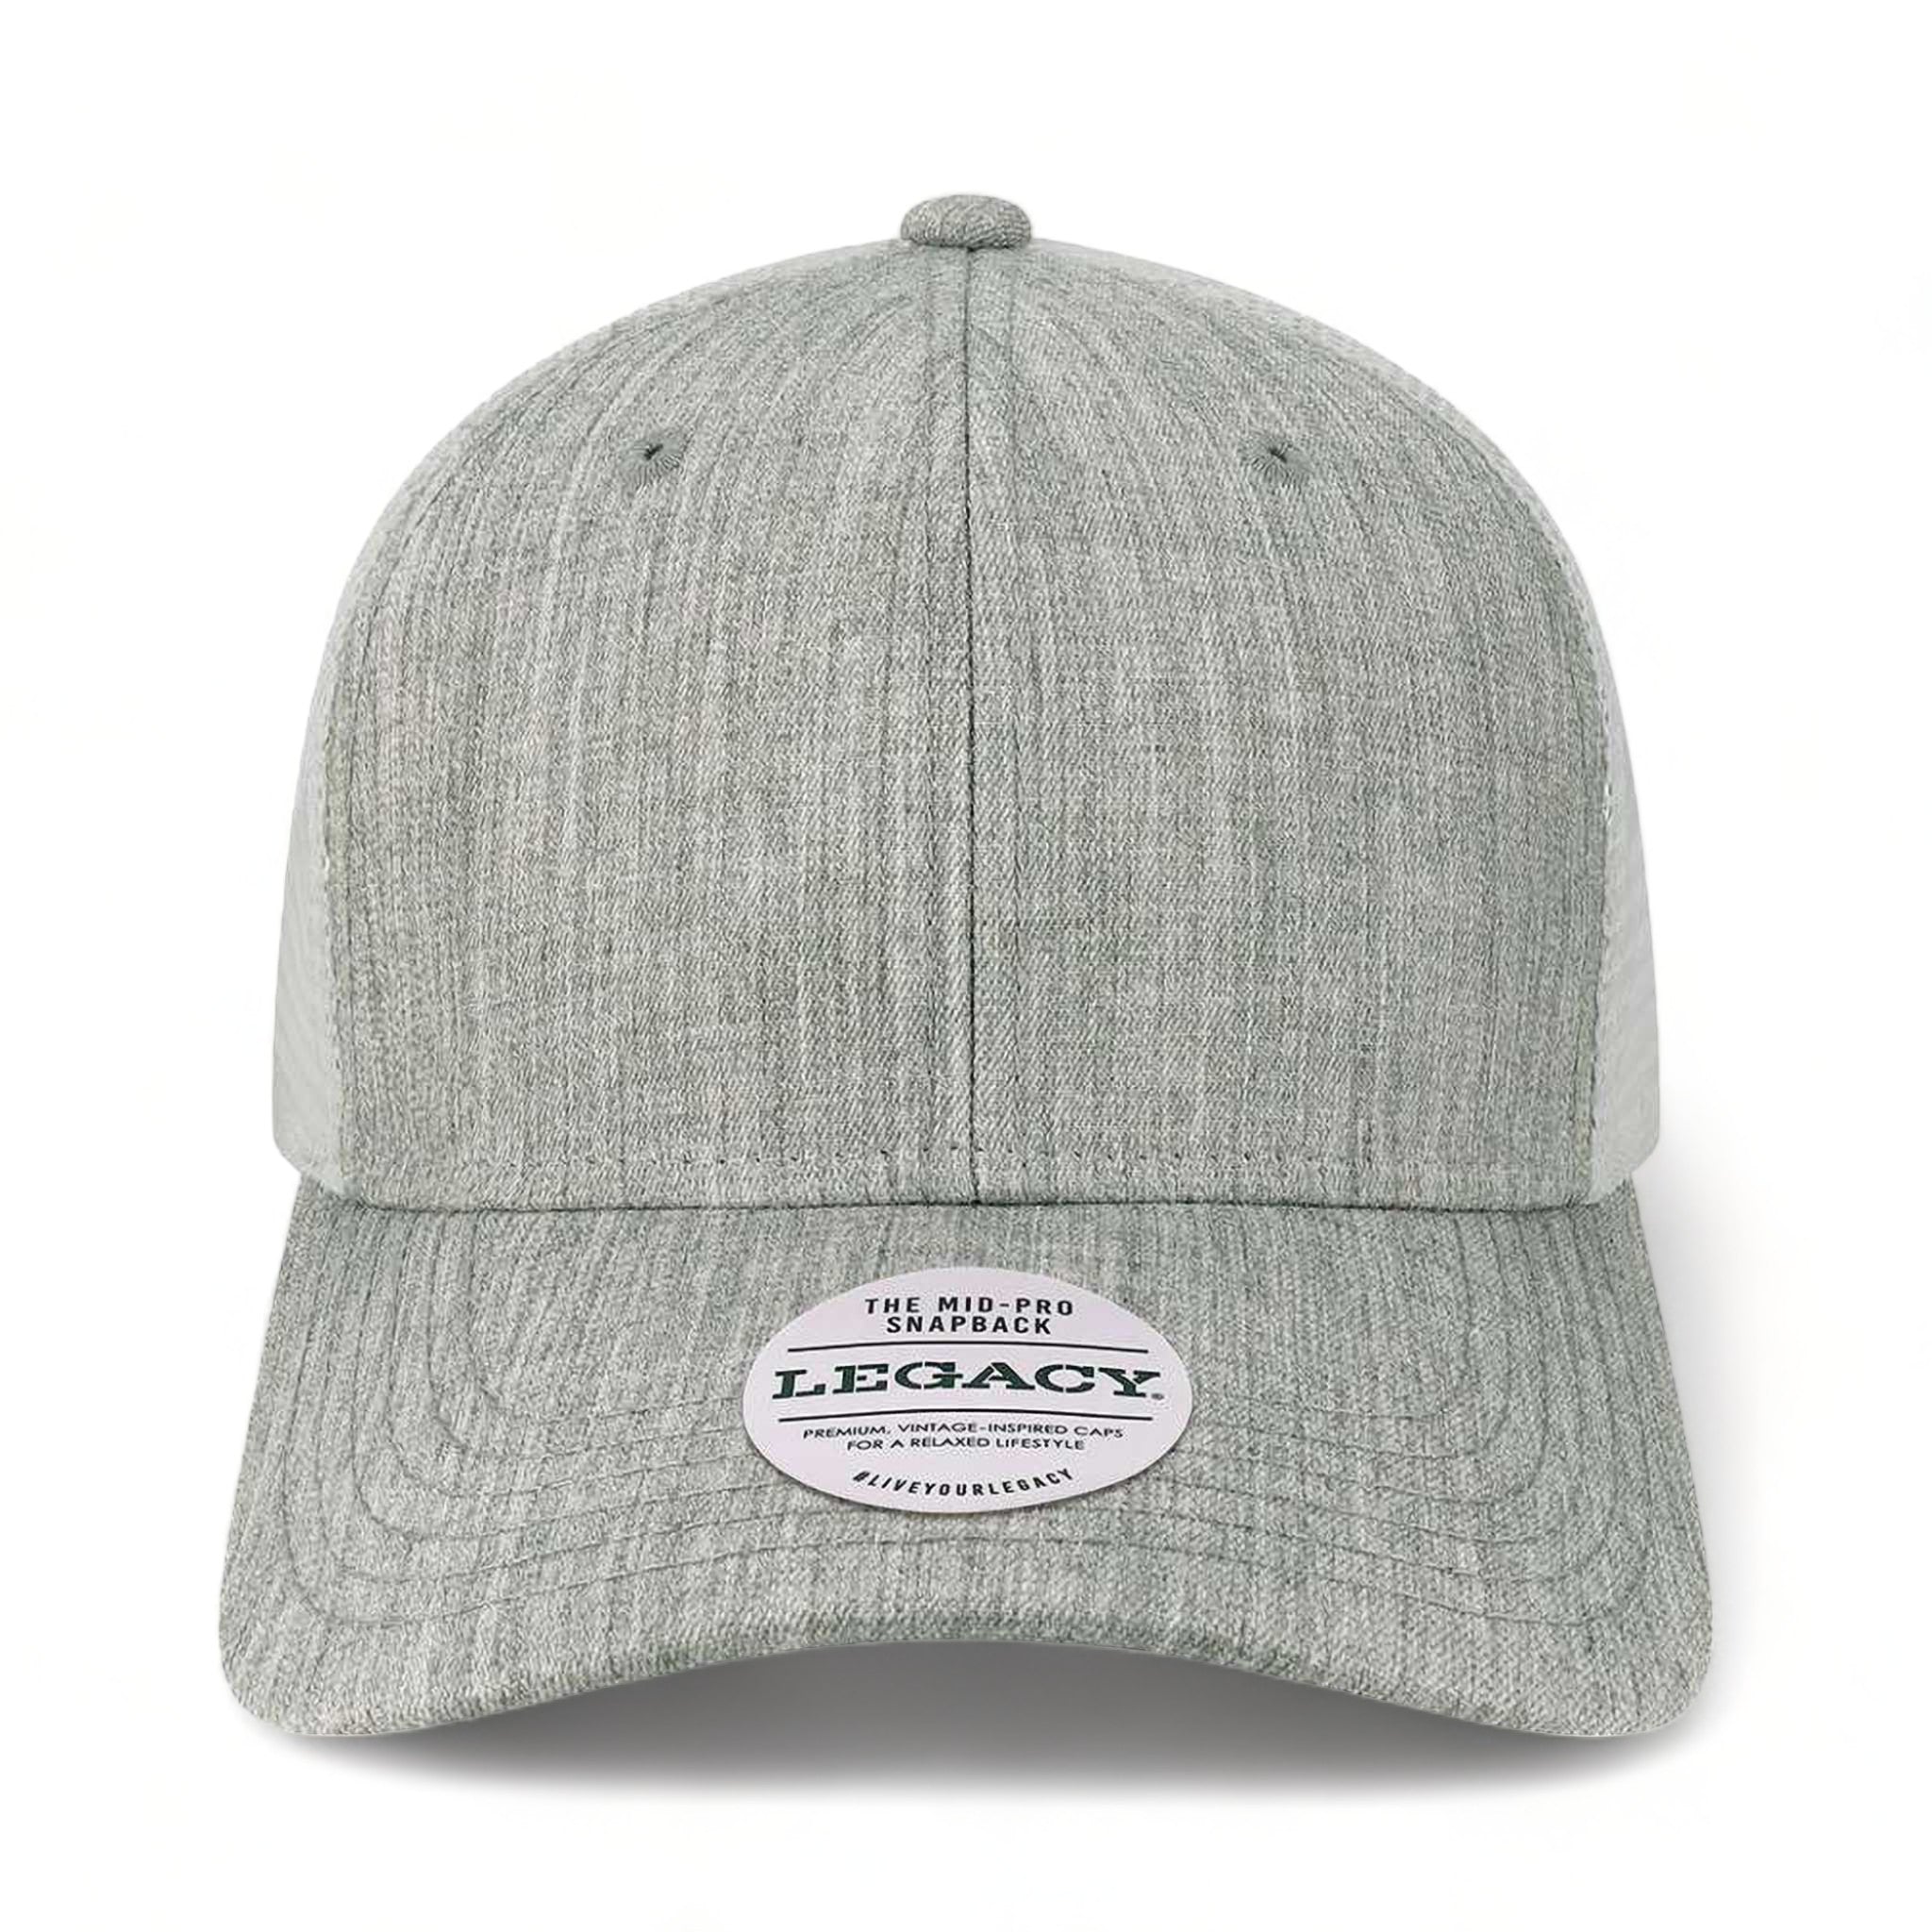 Front view of LEGACY MPS custom hat in mélange grey and white